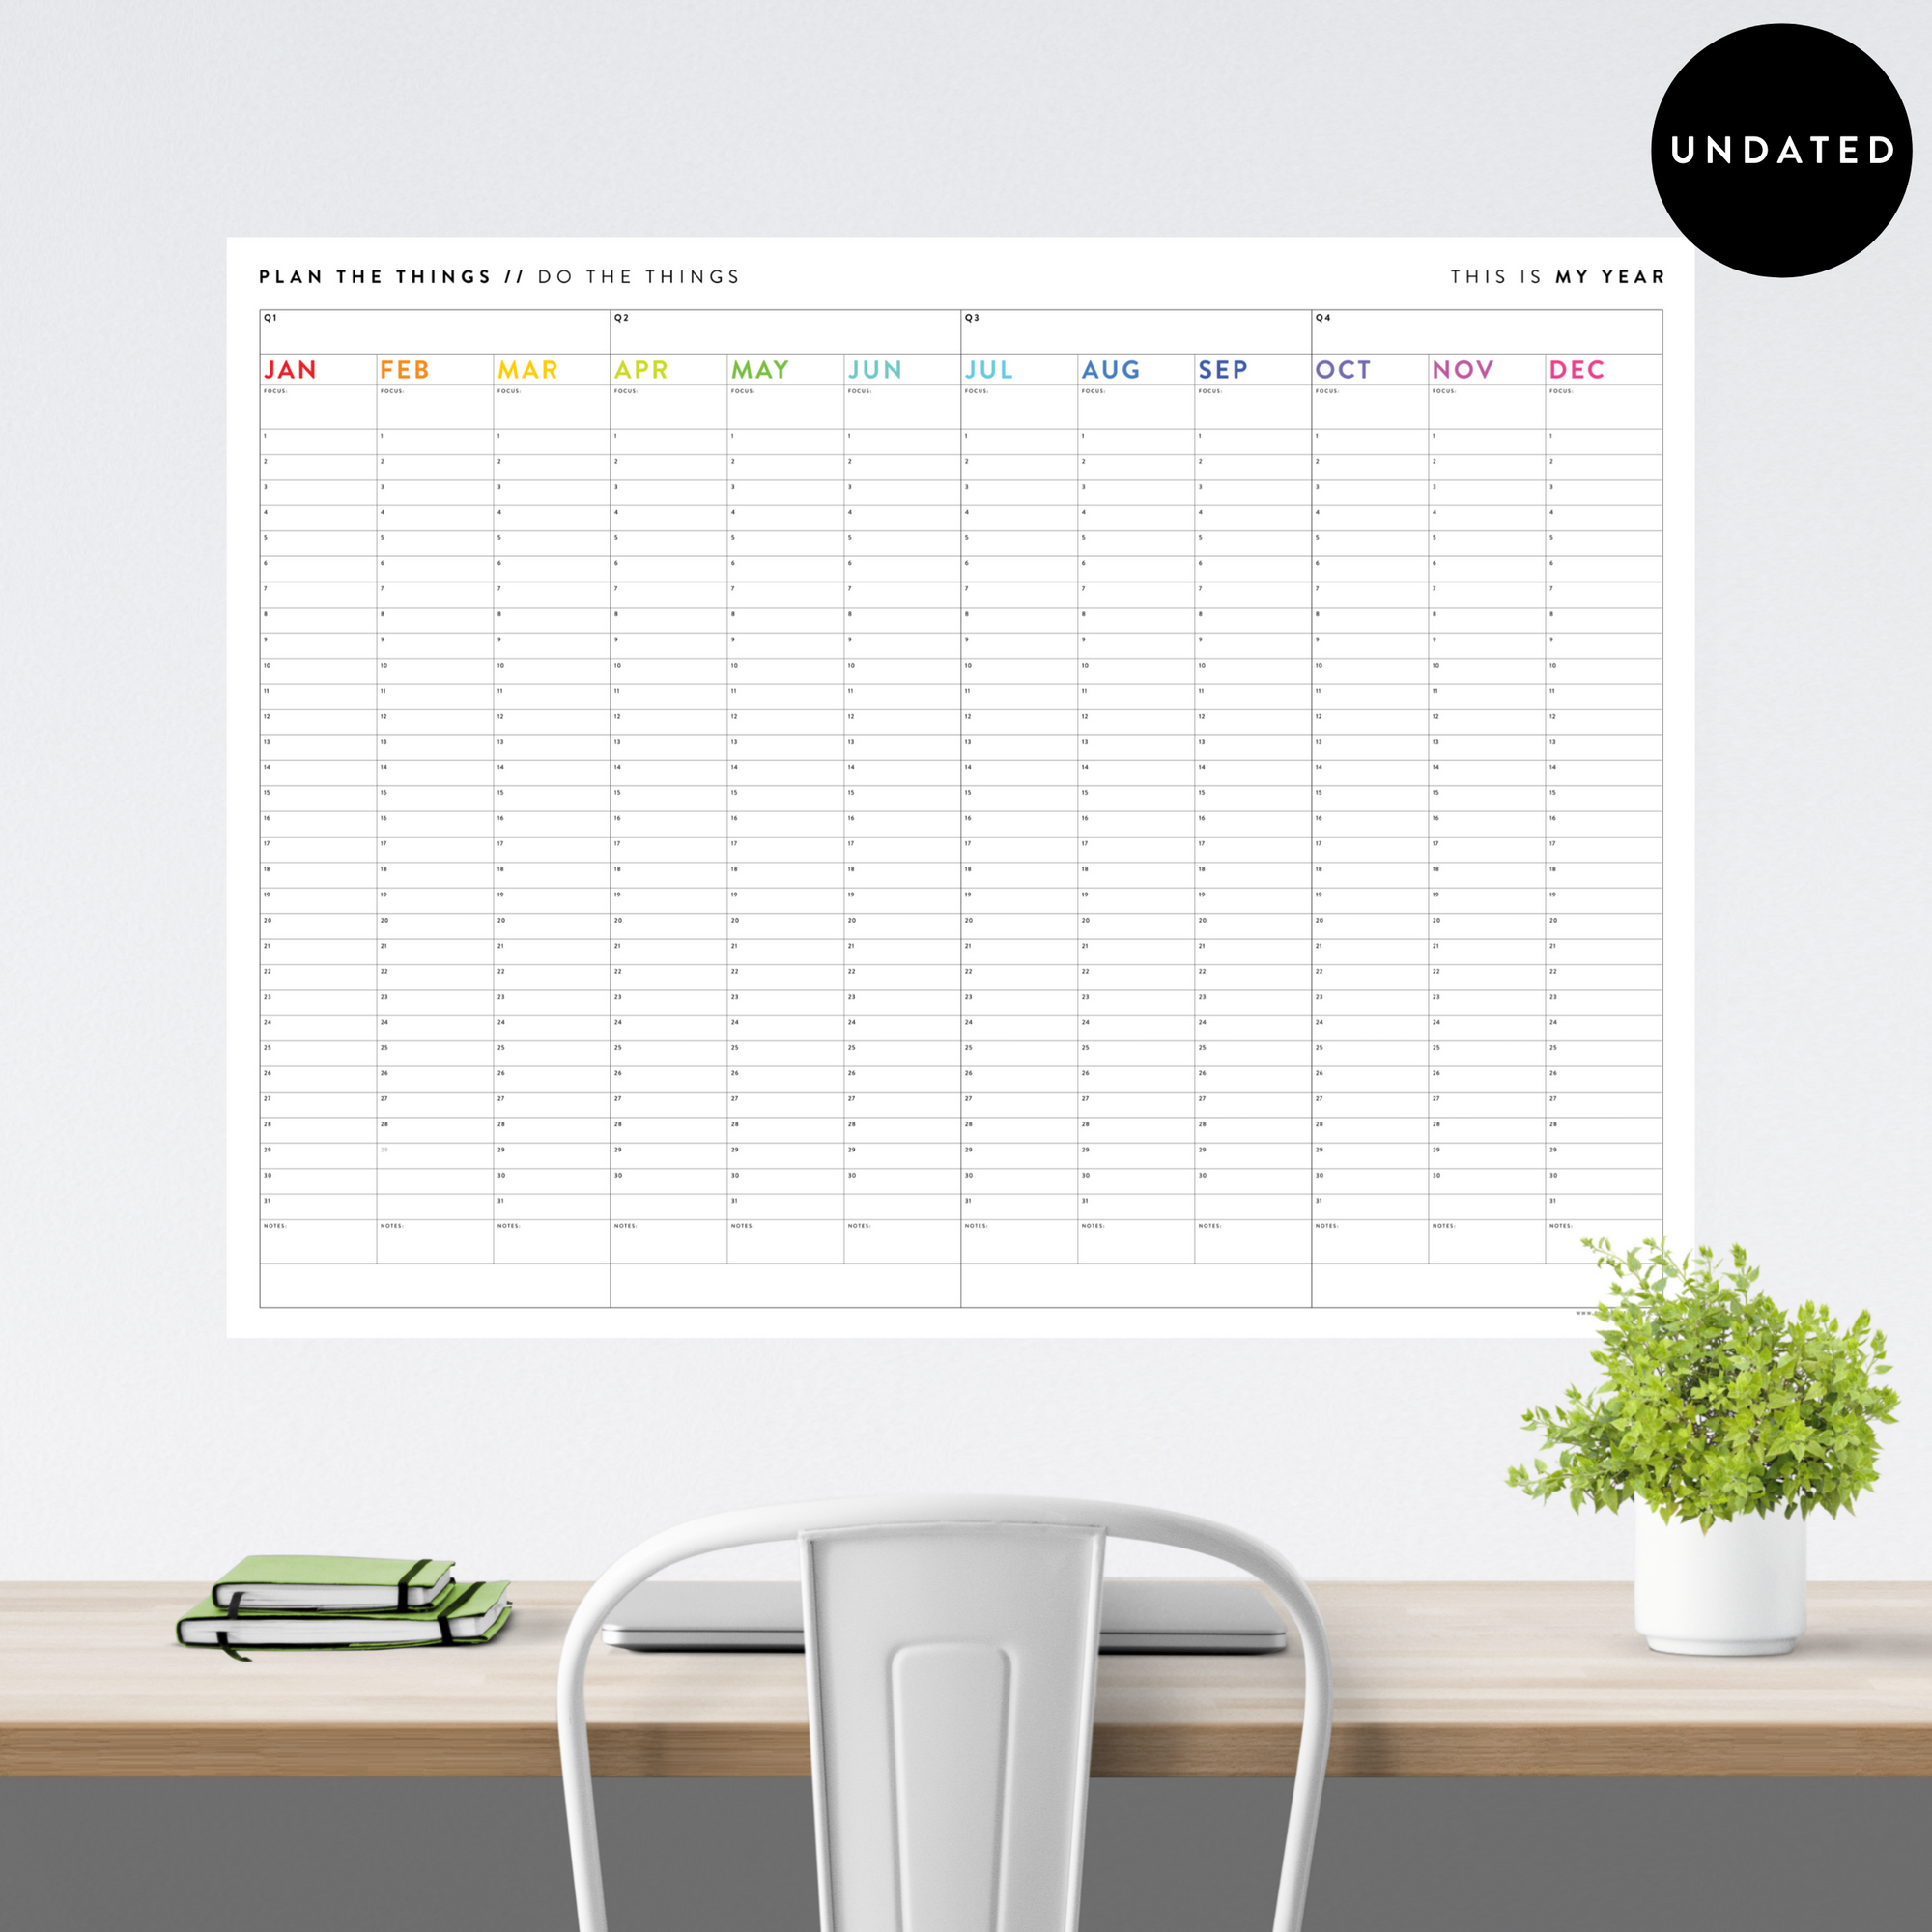 UNDATED PERPETUAL / FOREVER WALL CALENDAR - ANNUAL + QUARTERLY PLANNING